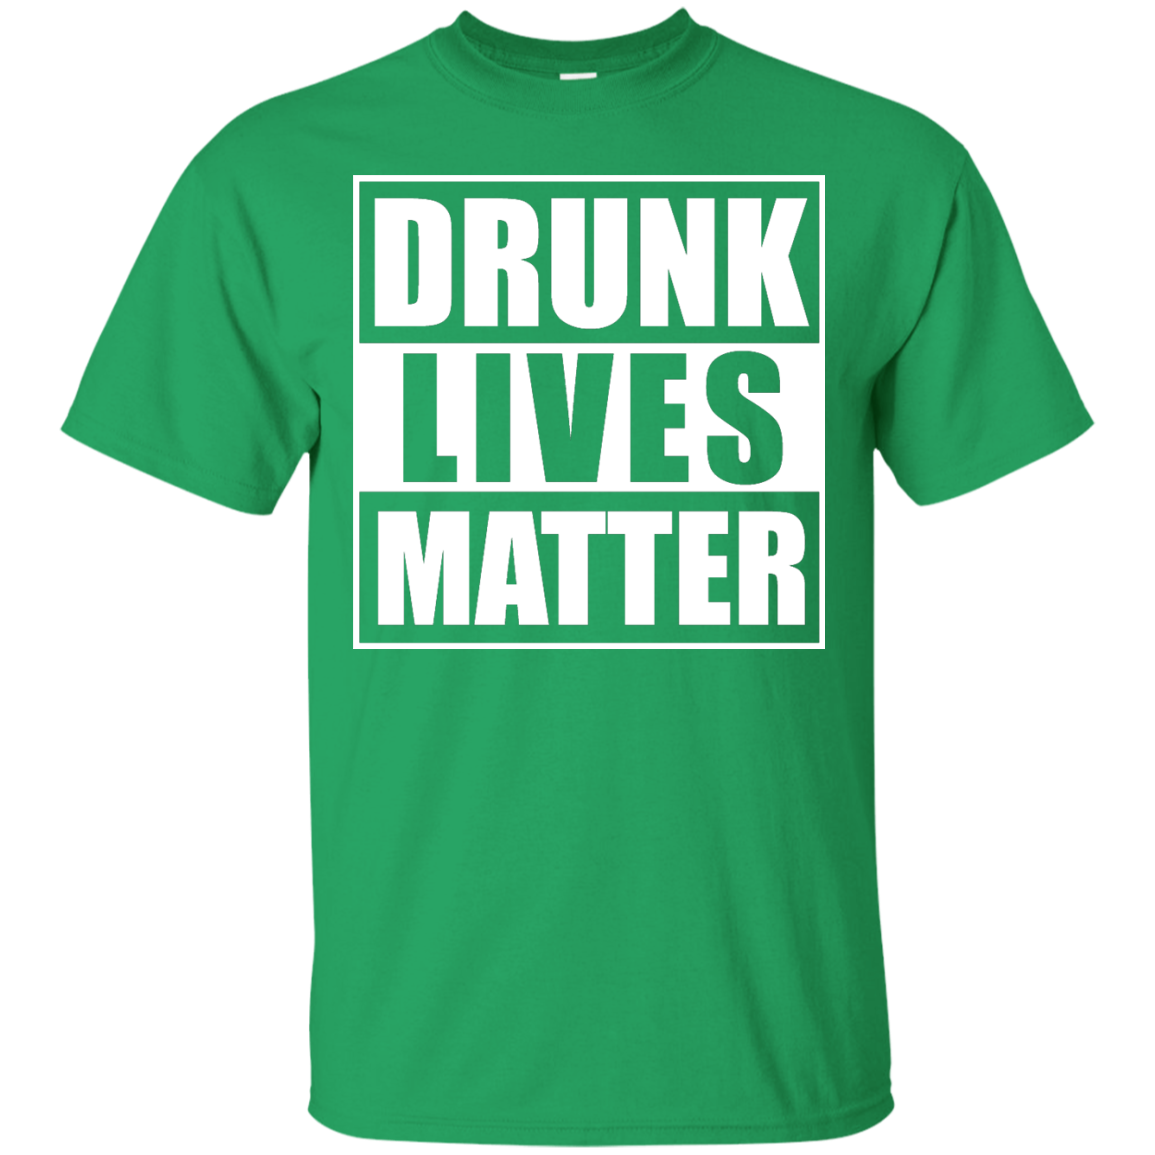 Life is a drink. White Lives matter футболка. Футболка Irish Drink. Drunk Driving t Shirt. St Patrick's Day drunk Yoga picture on the Tshirt.